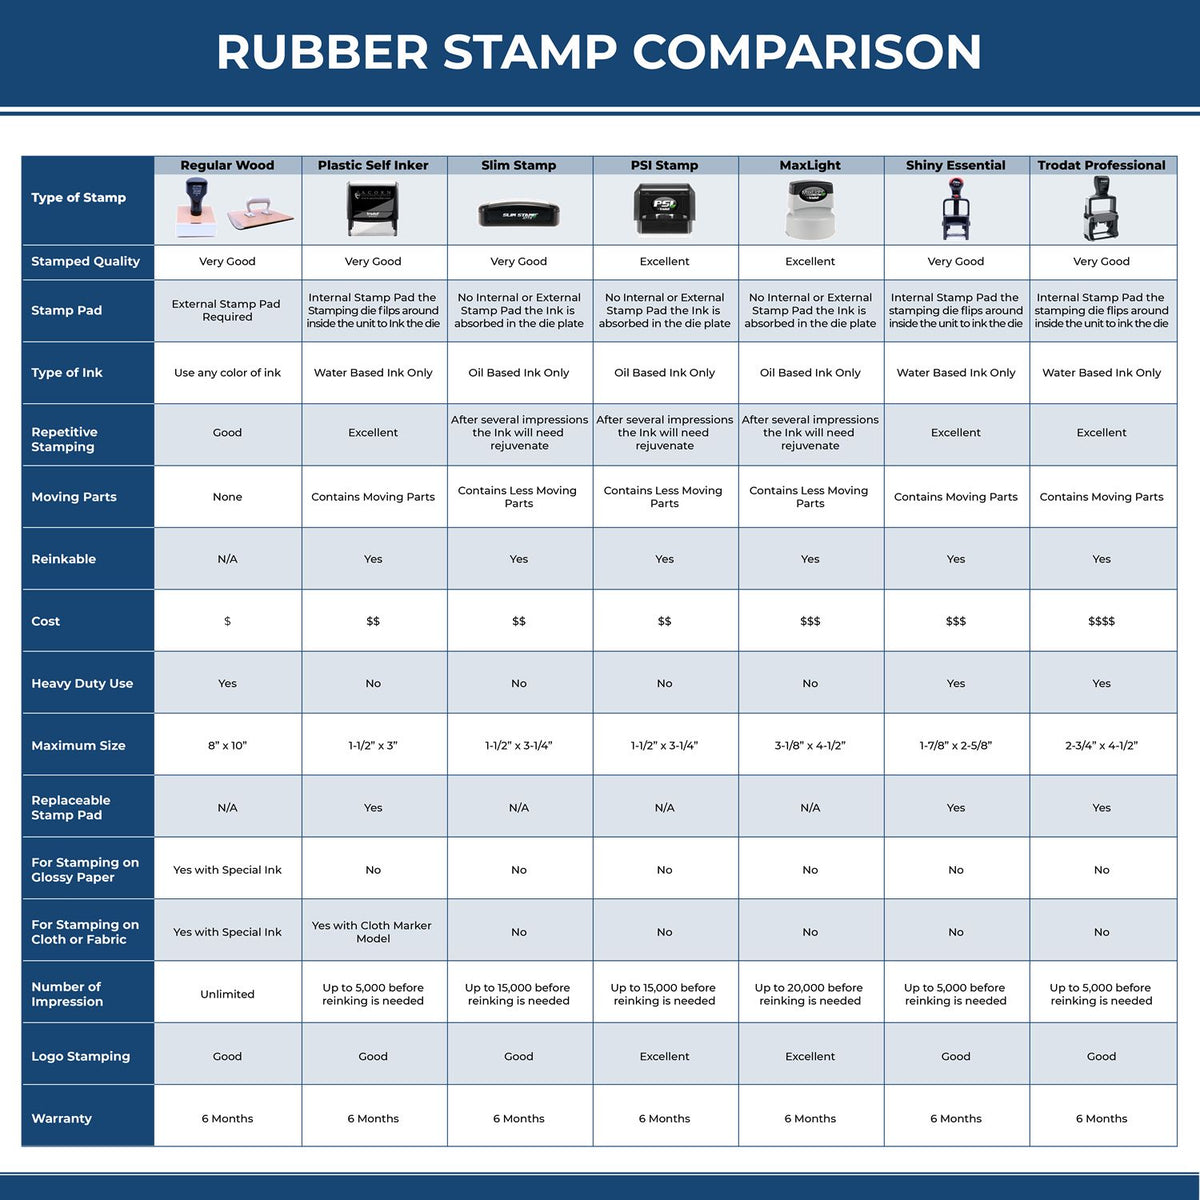 Courtesy Copy Original Filed Electronically Rubber Stamp 4067R Rubber Stamp Comparison